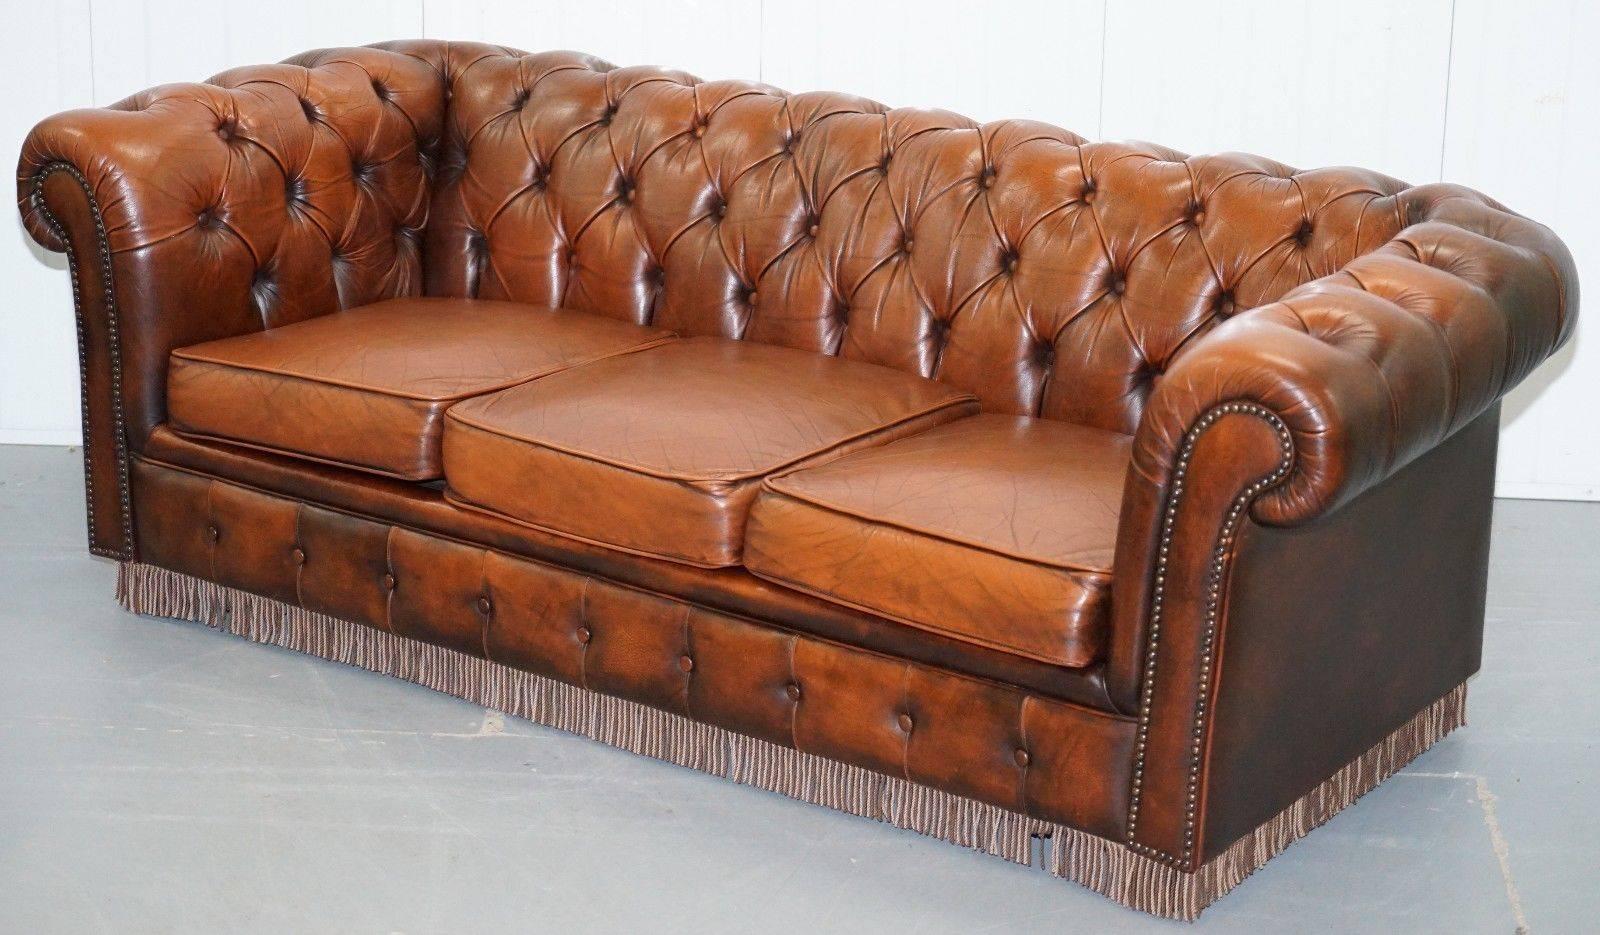 We are delighted to offer for sale this original vintage hand dyed aged brown leather Chesterfield sofabed

A very rare find, this is an original Chesterfields of England vintage sofabed with original spring bed frame and foam pad mattress that